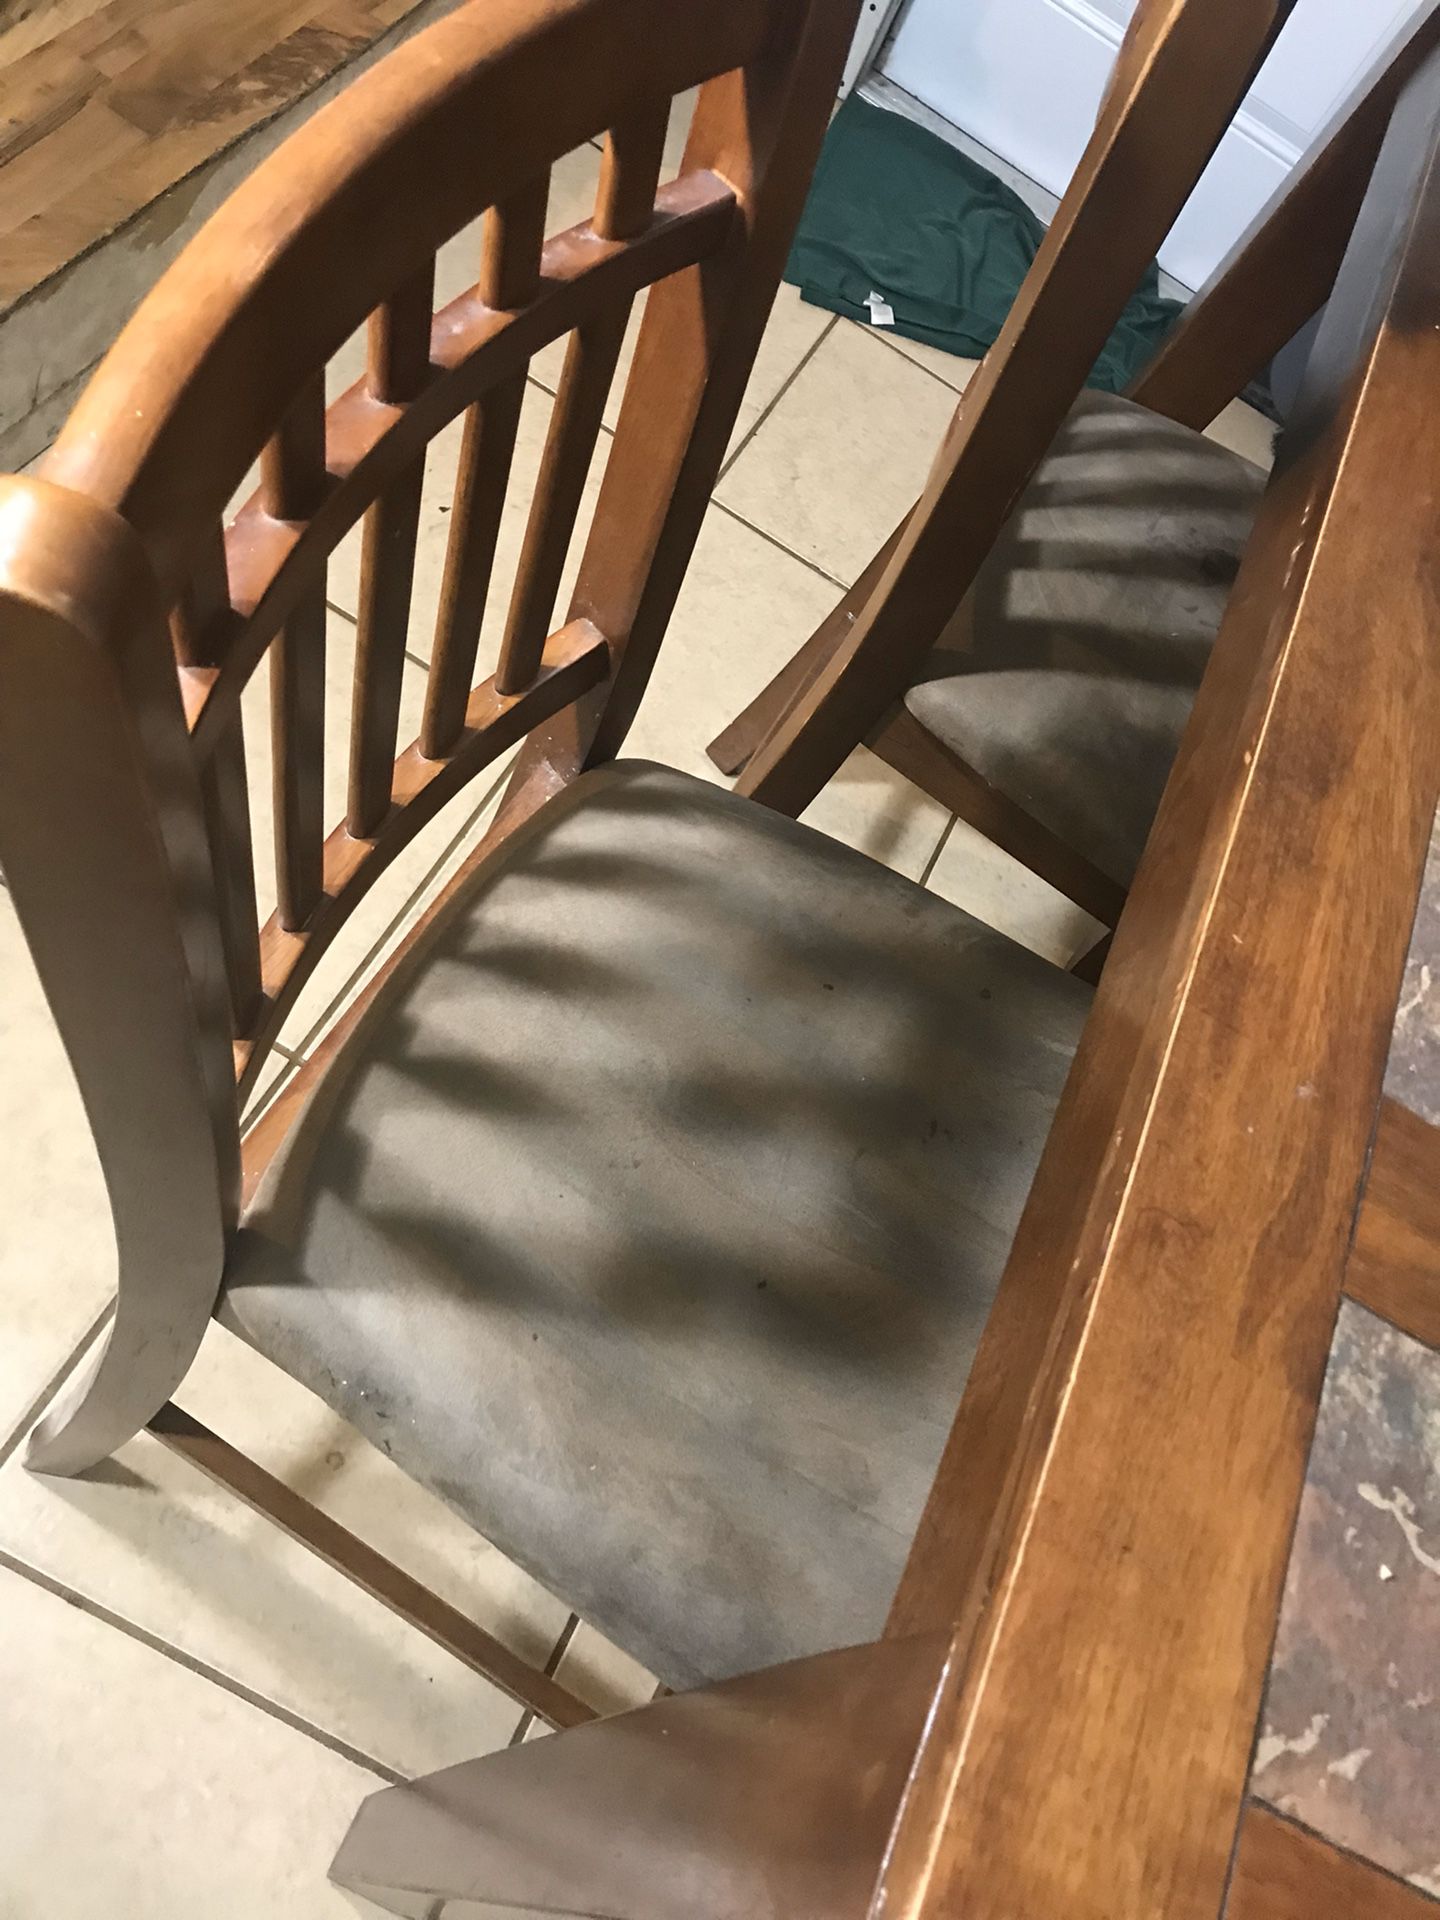 Dinner table chairs